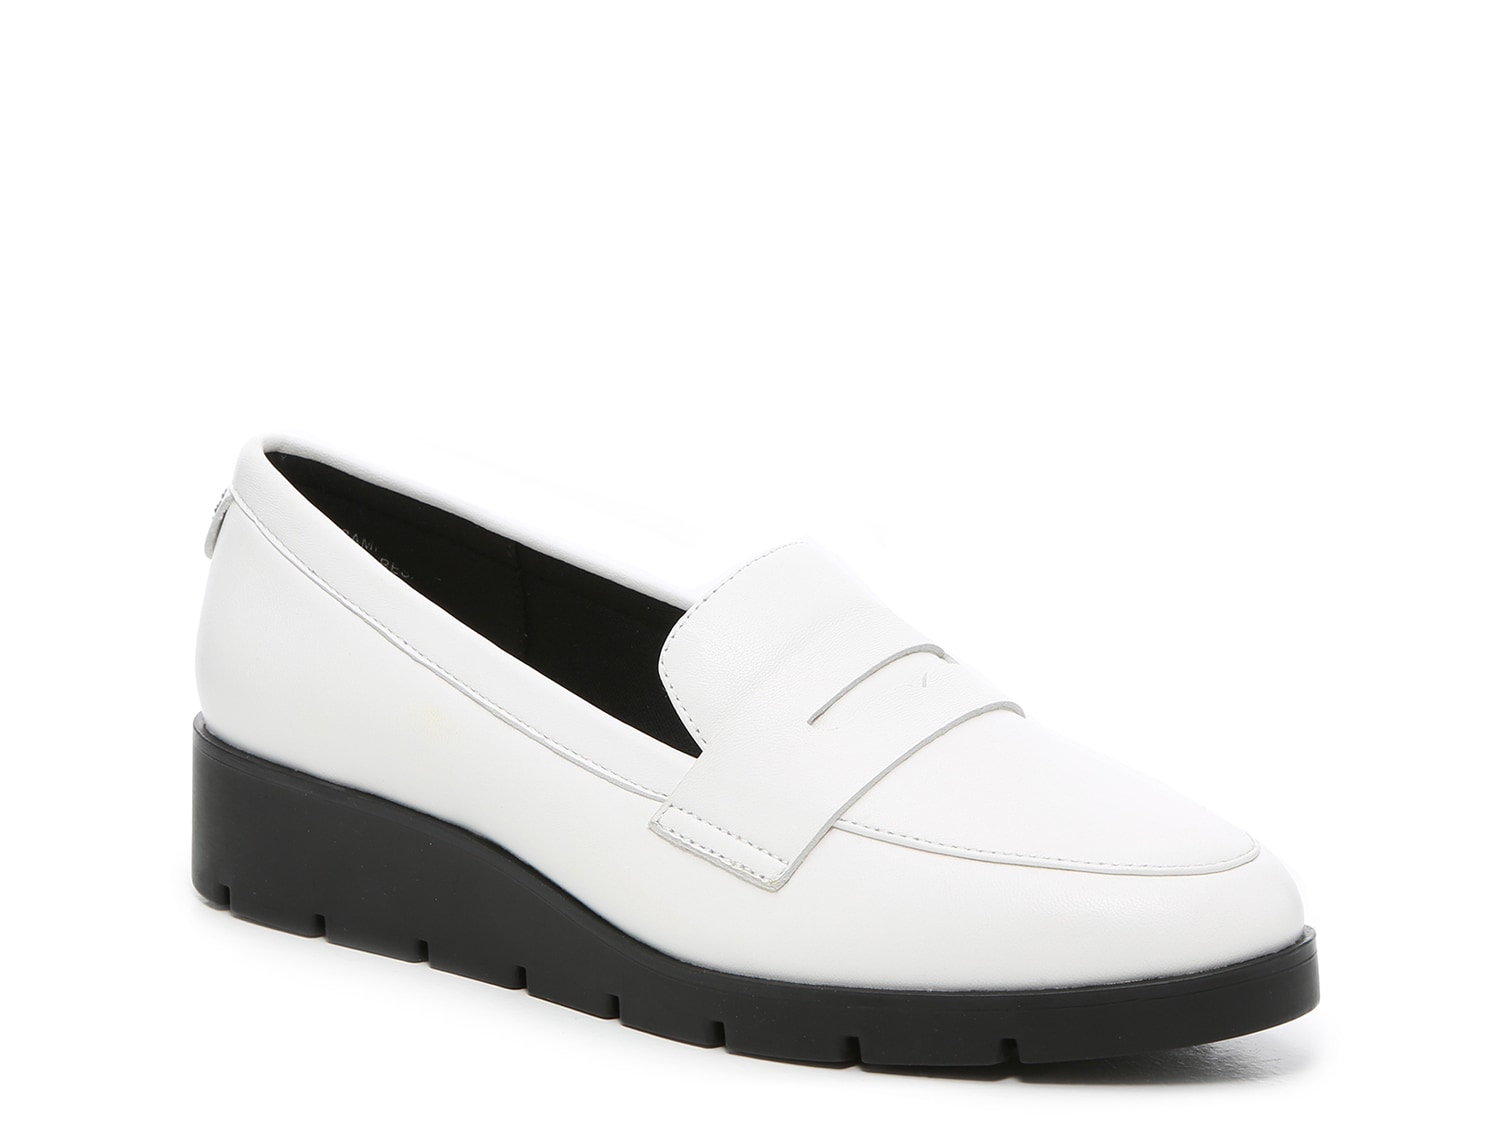 anne klein black and white shoes